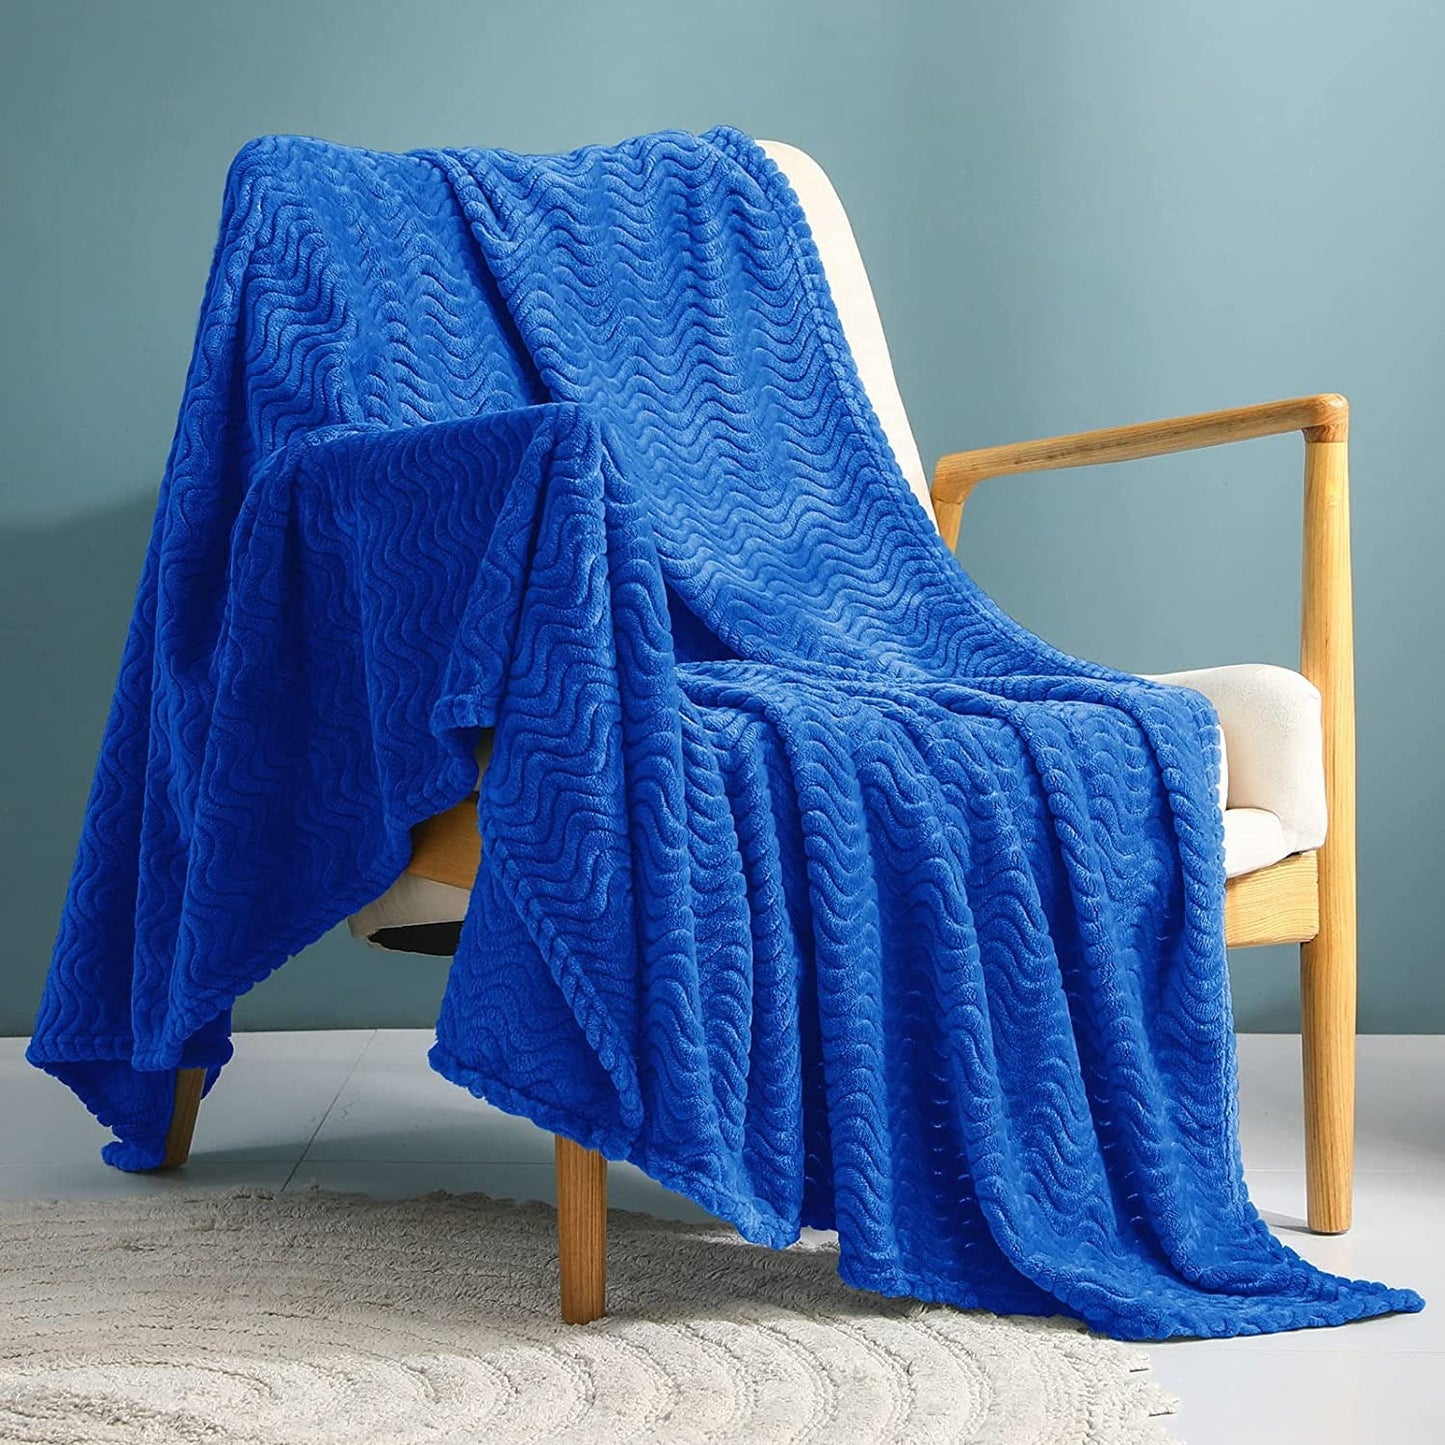 Exclusivo Mezcla Large Flannel Fleece Throw Blanket, 50x70 Inches Soft Jacquard Weave Wave Pattern Blanket for Couch, Cozy, Warm, Lightweight and Decorative Cobalt Blue Blanket